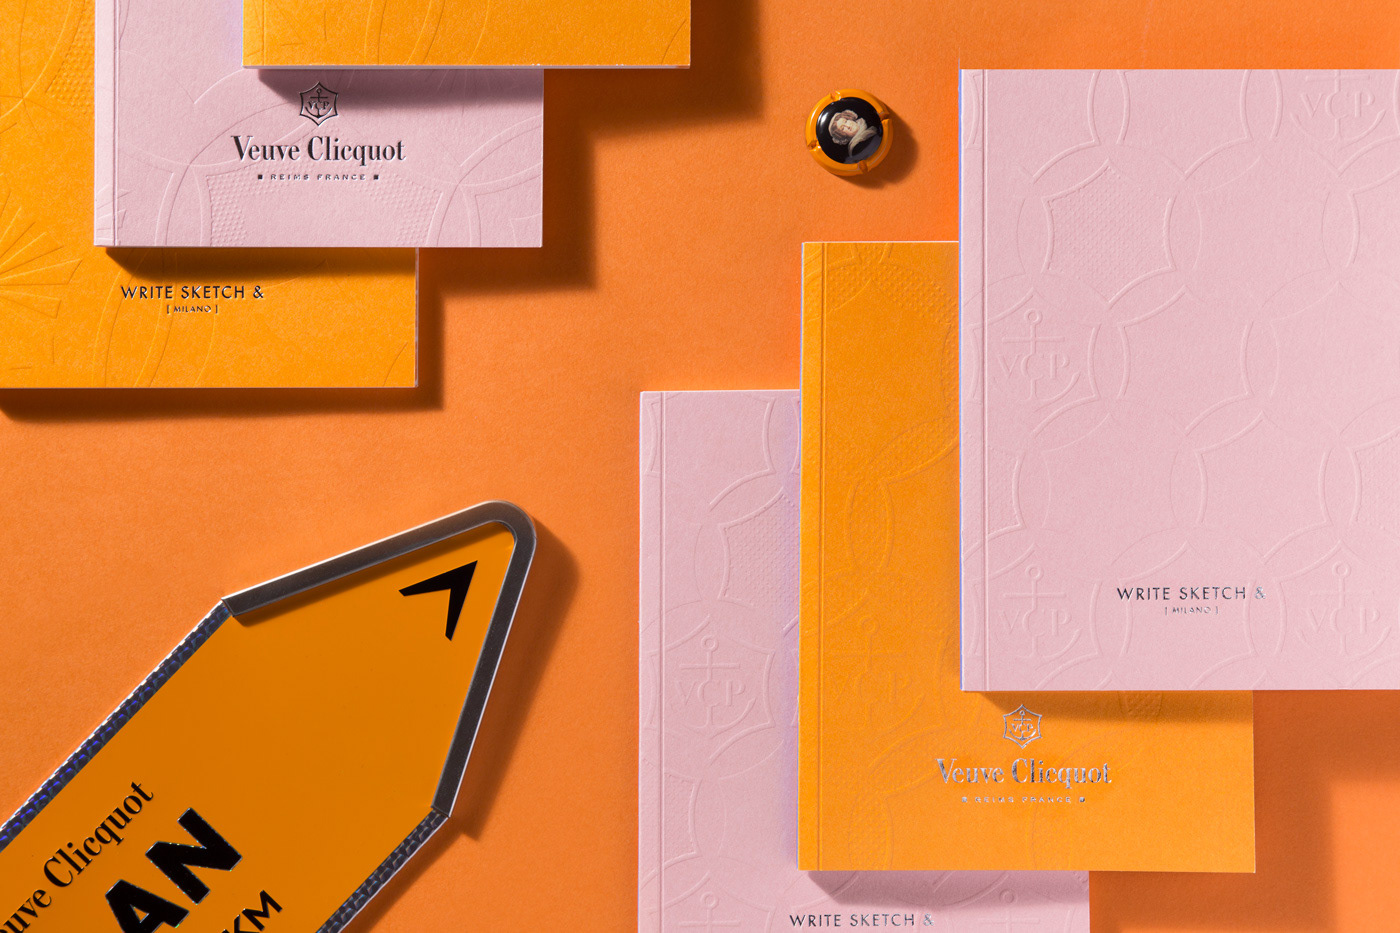 Champagne notebook notebooks Stationery Veuve Clicquot luxury print design  embossing paper